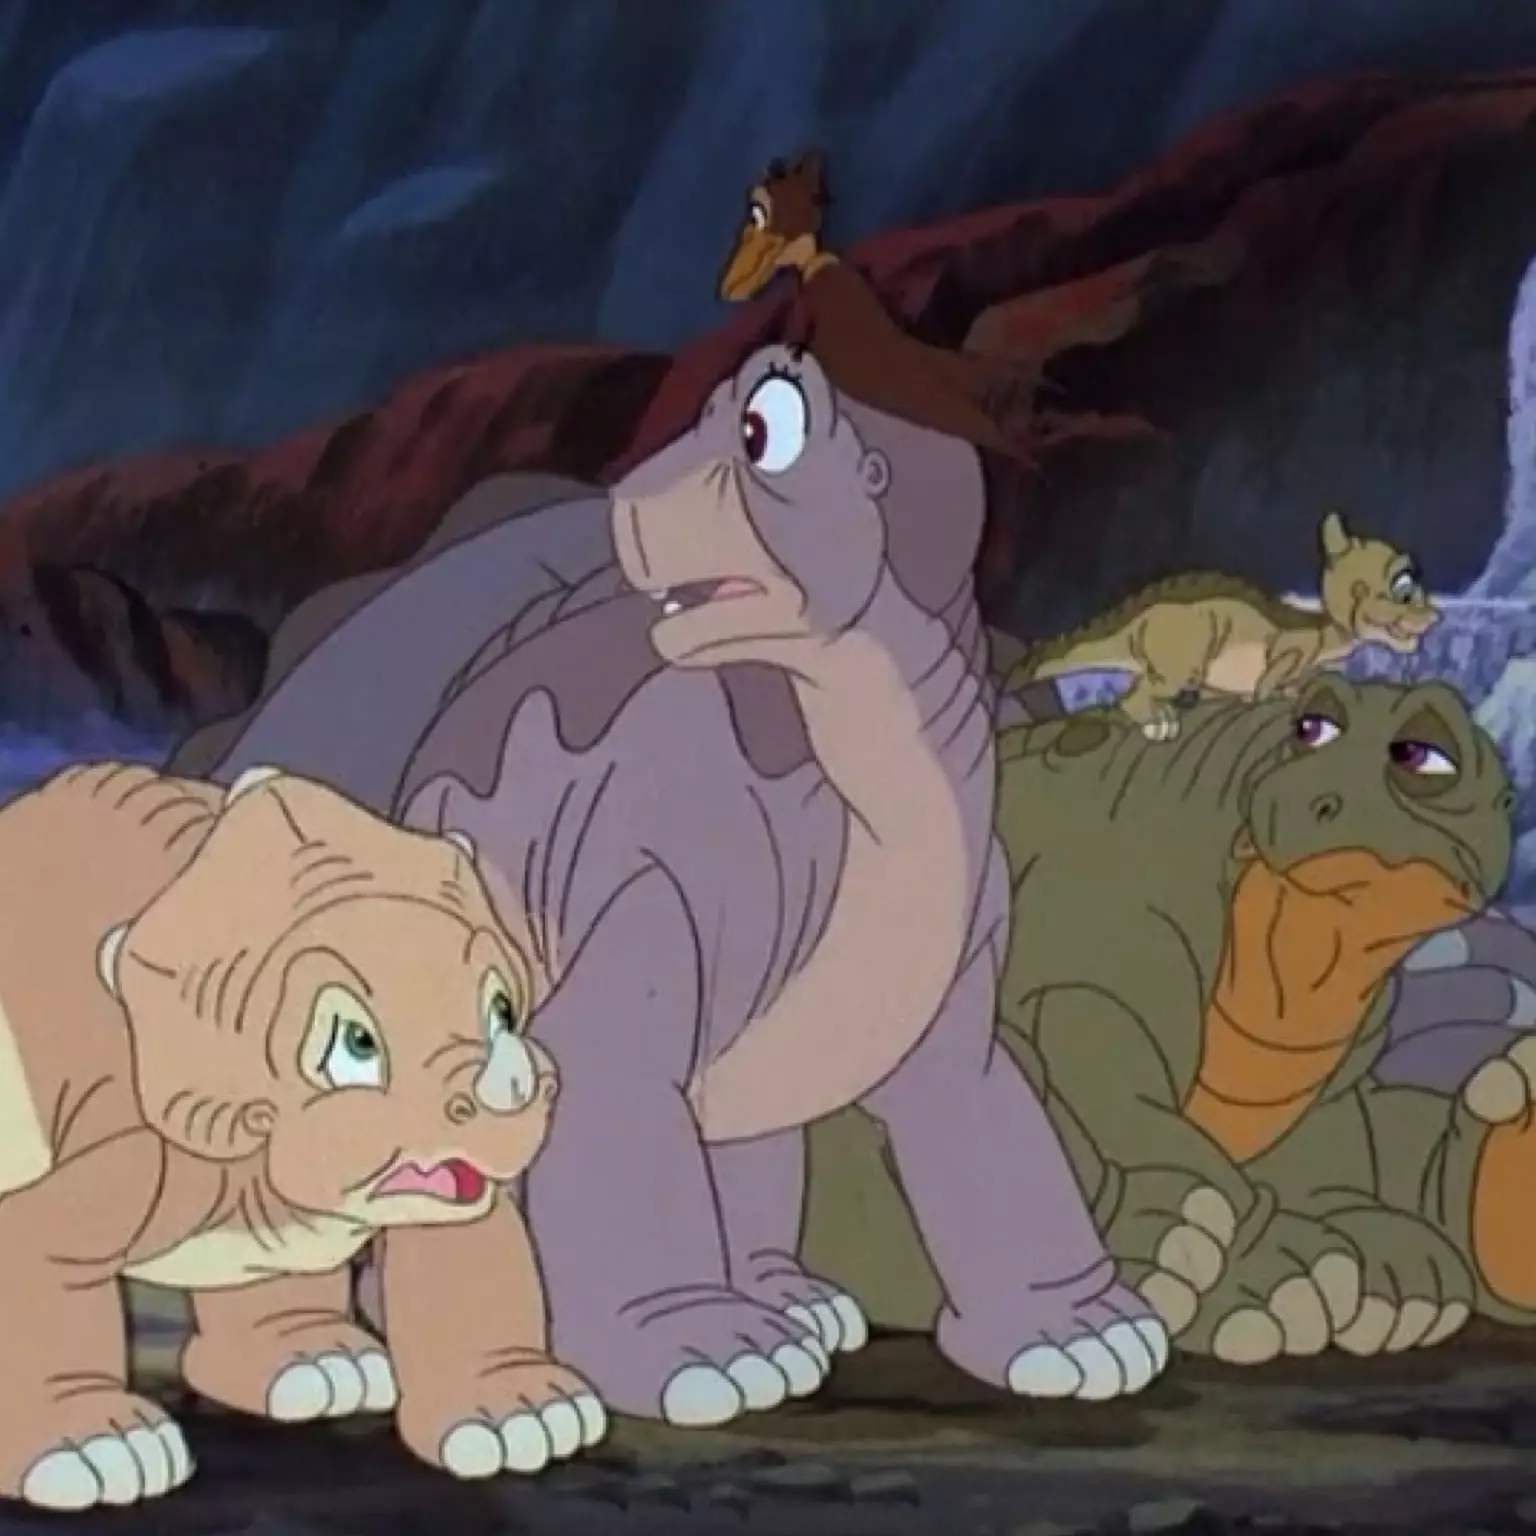 'The Land Before Time' is a childhood classic (